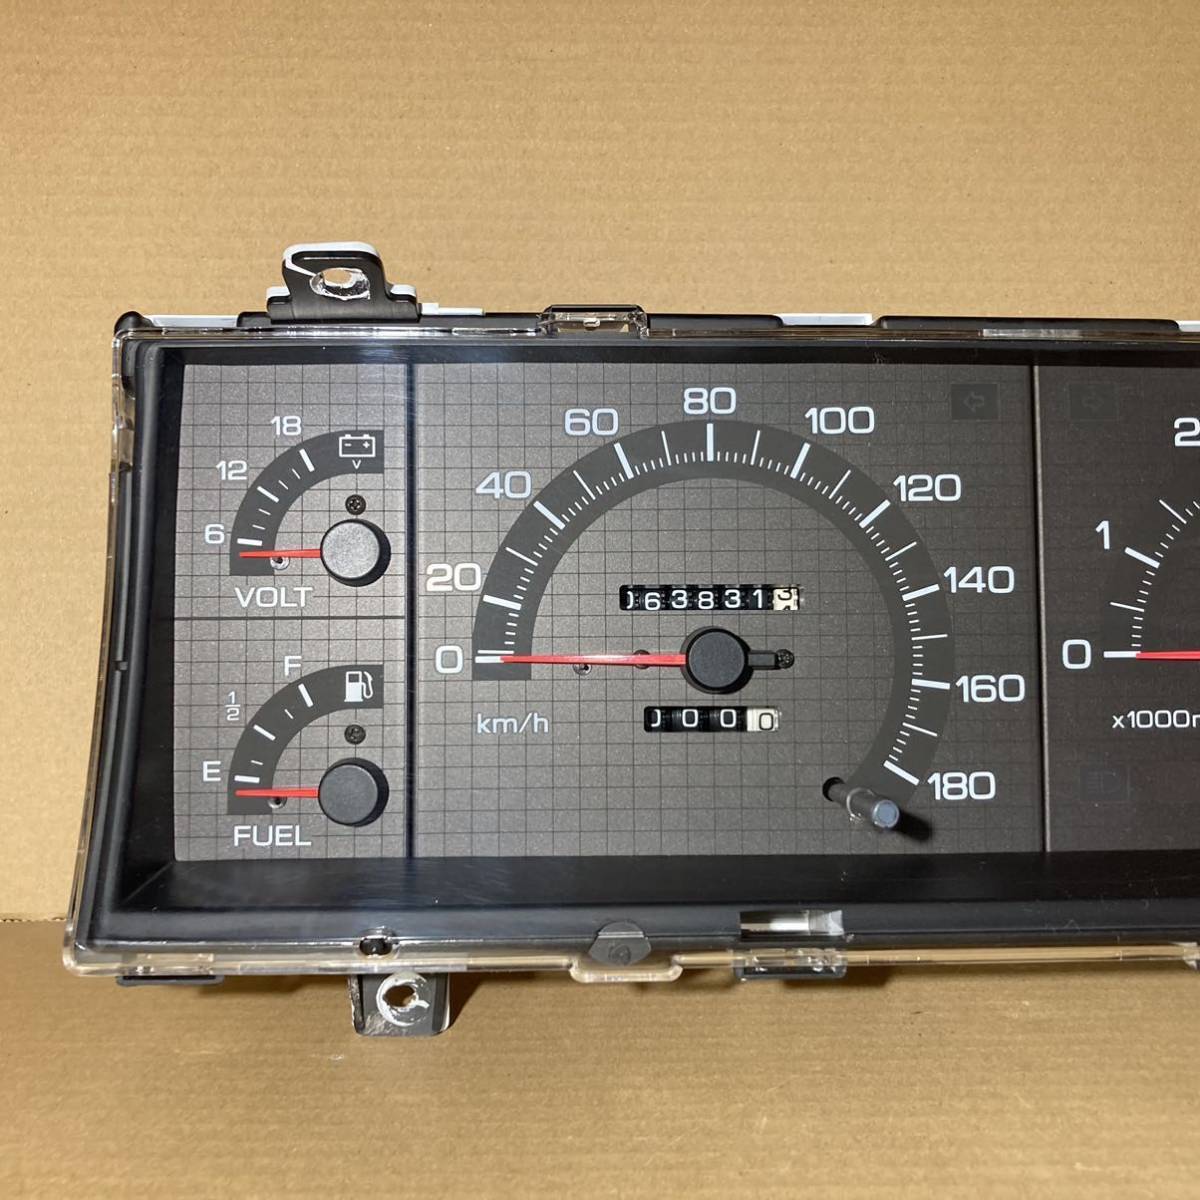  beautiful goods single cam for speed meter R31 HR31 Skyline latter term 63831km needle color fading fewer 